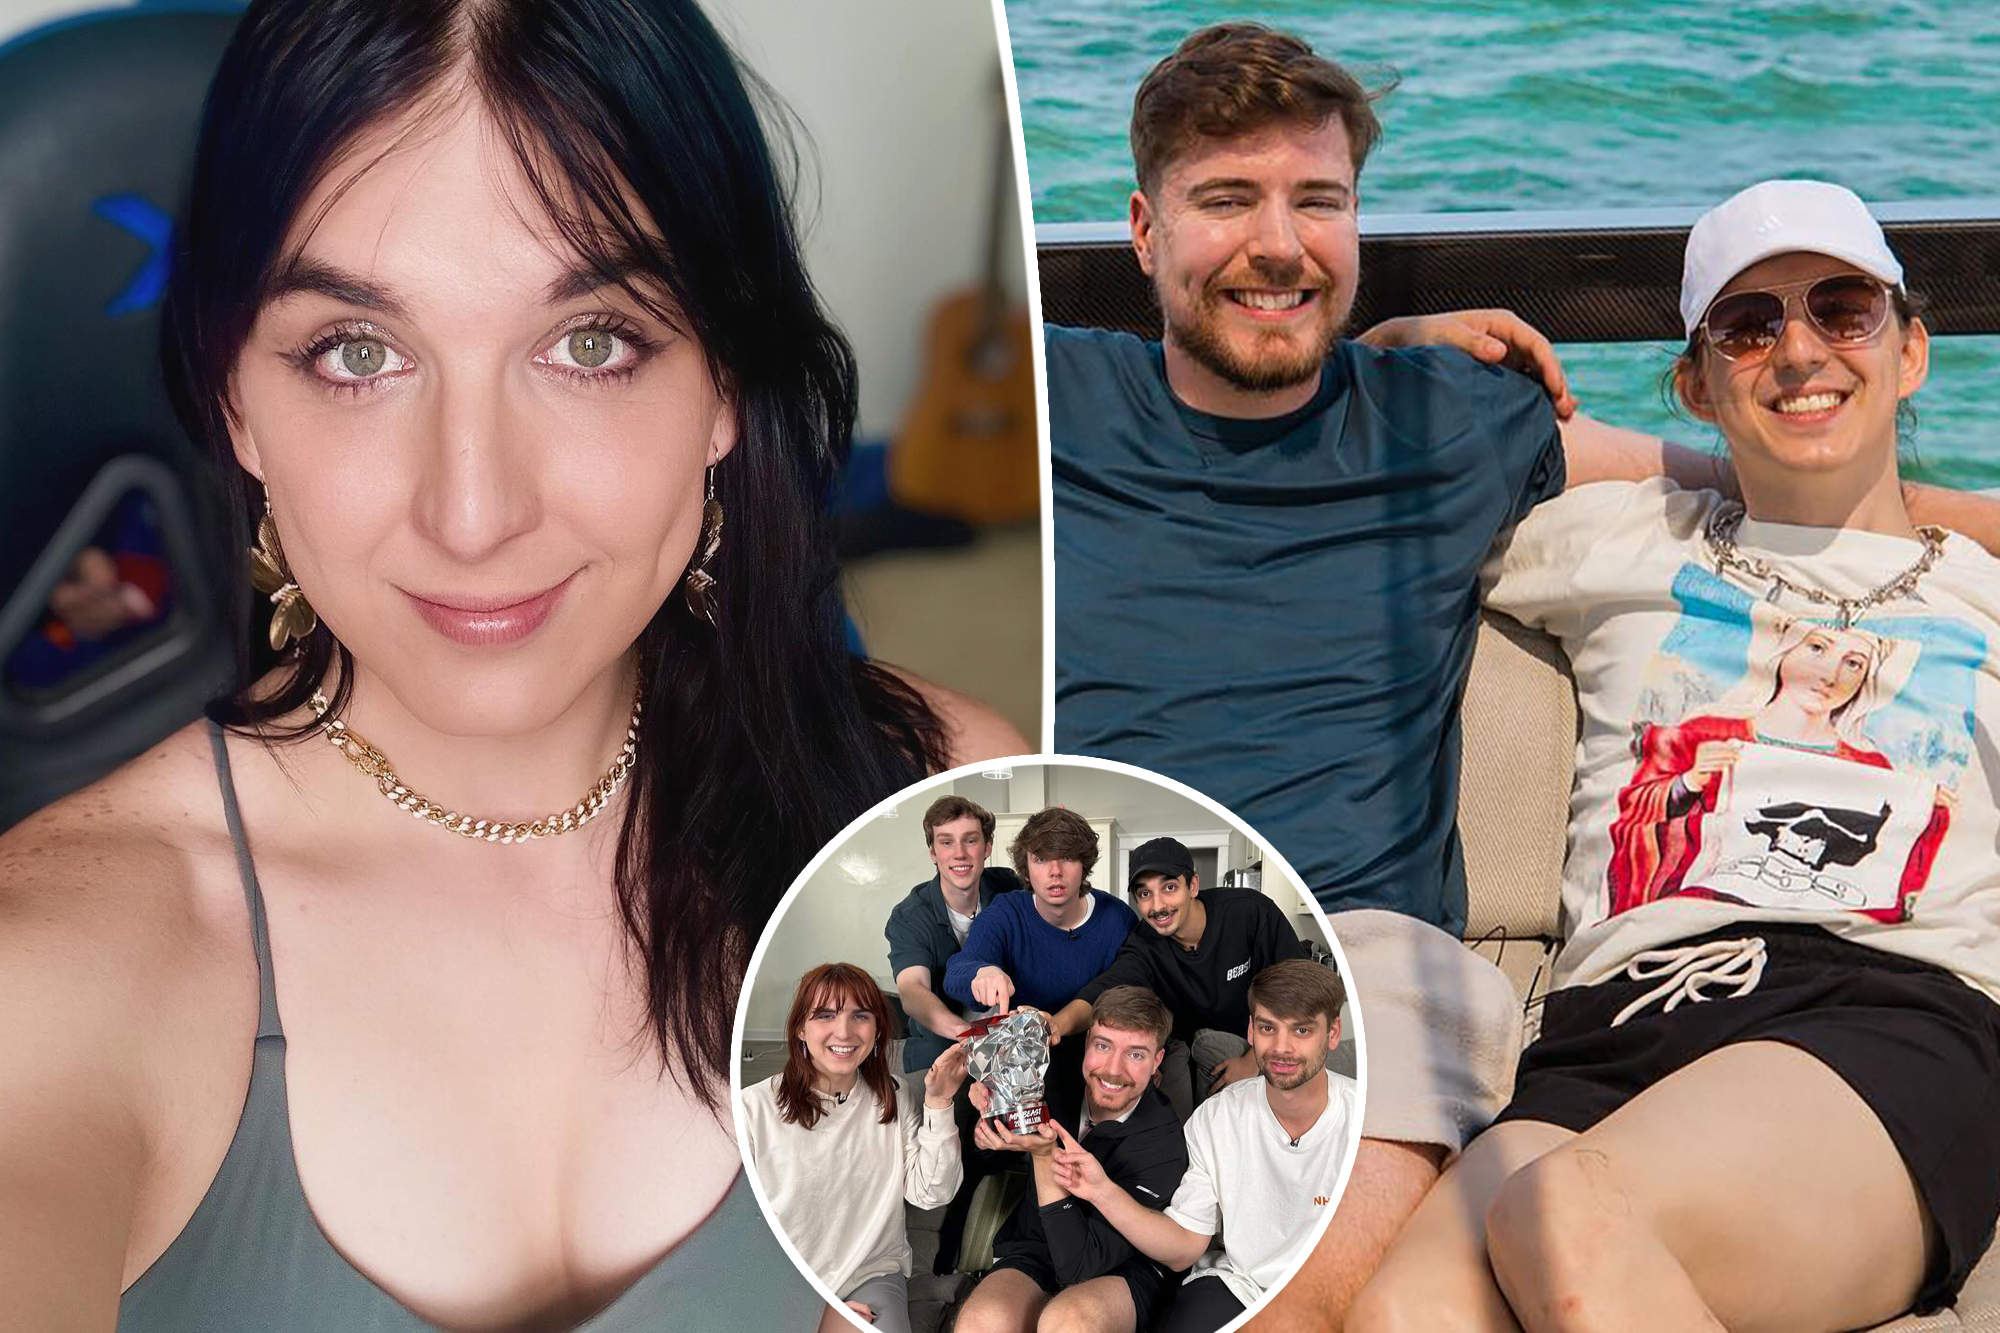 Shocking Twist: MrBeast's Co-Host Quits Amid Controversy